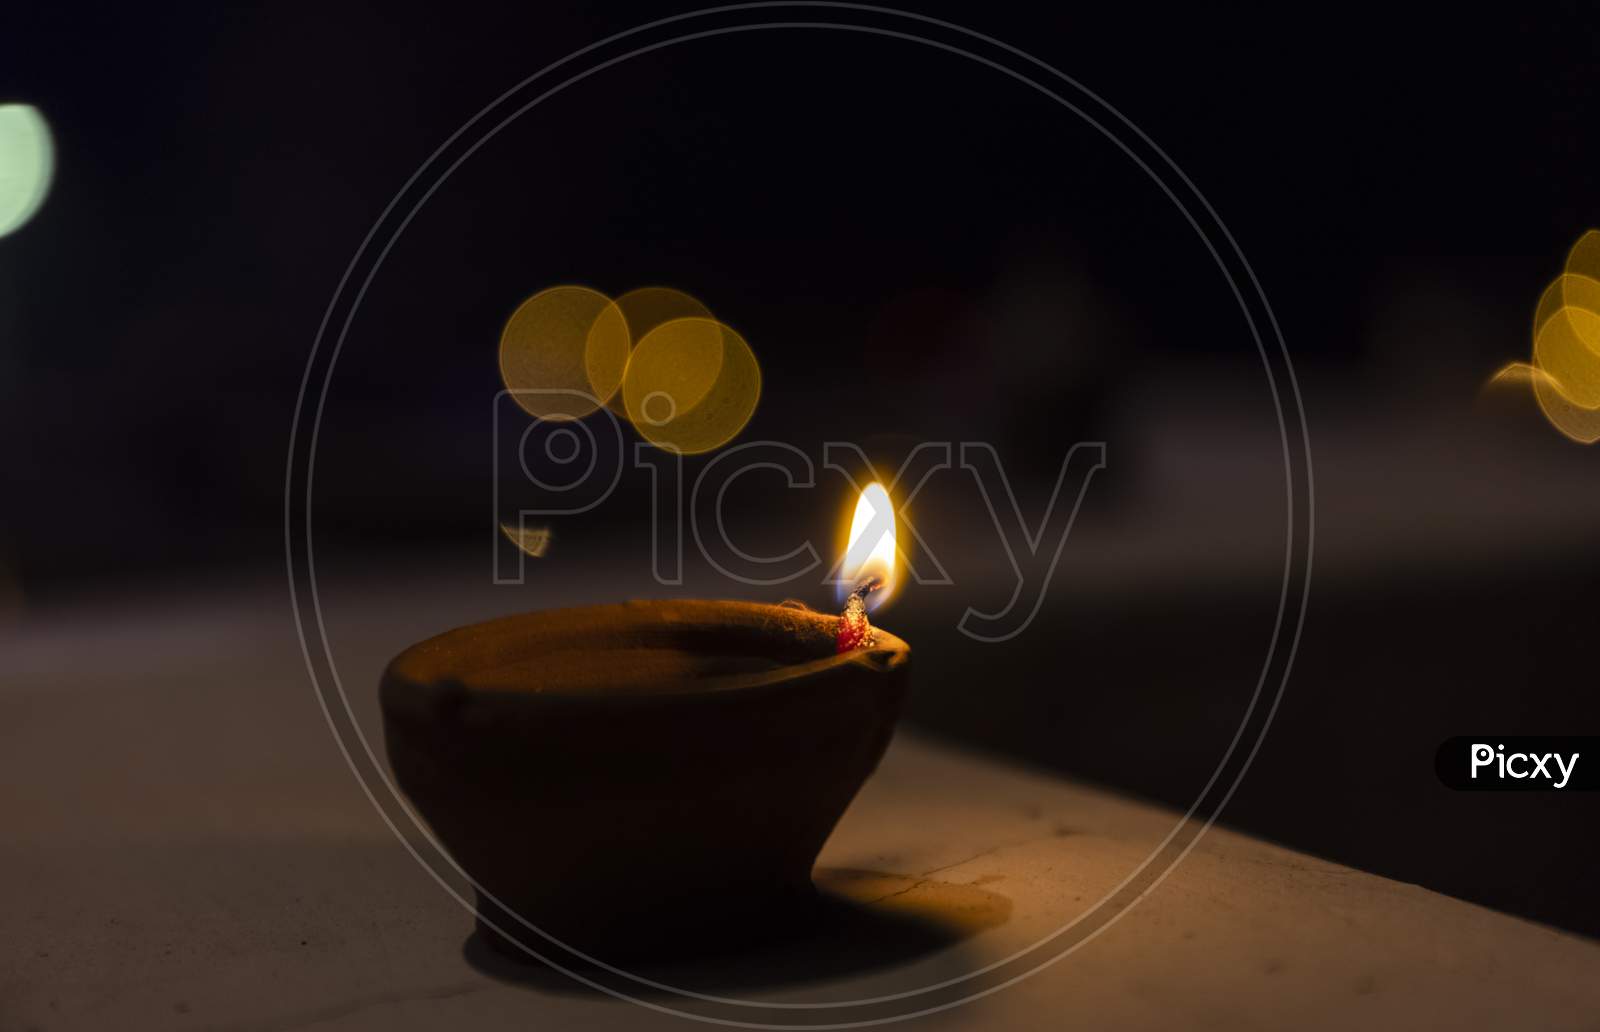 Diya candle light during diwali with colorful blurred background